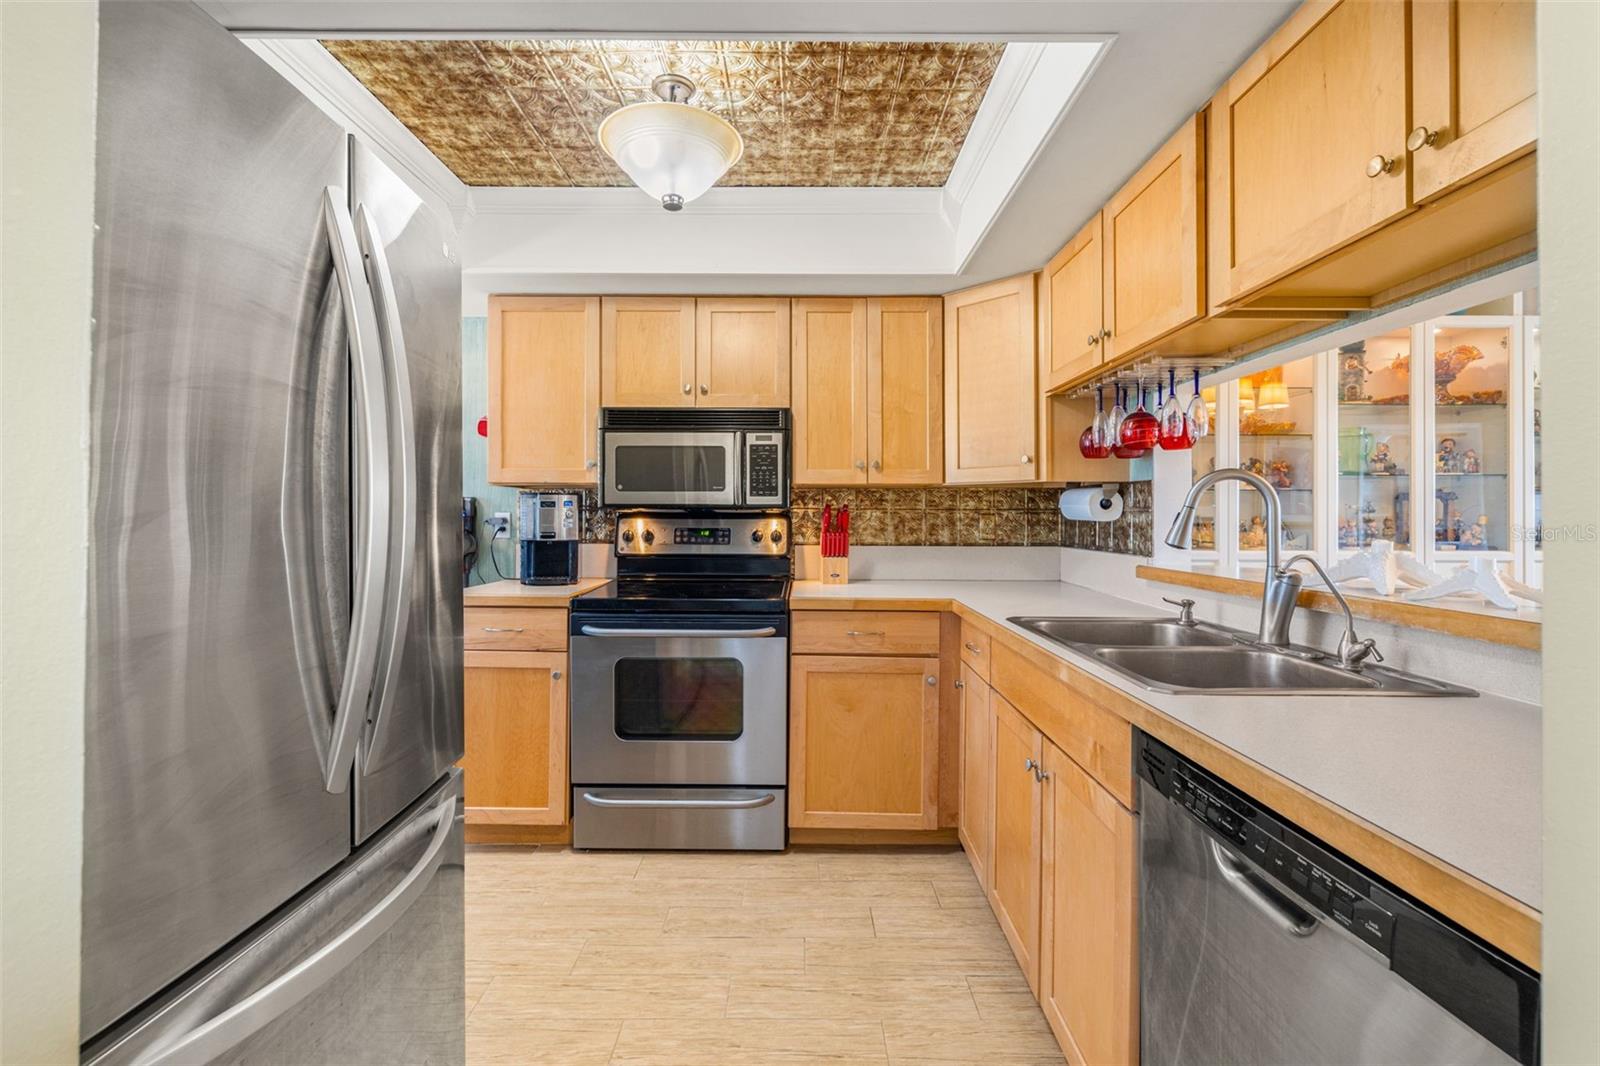 Beautiful updated kitchen with Birch custom cabinetry and stainless steel appliances!